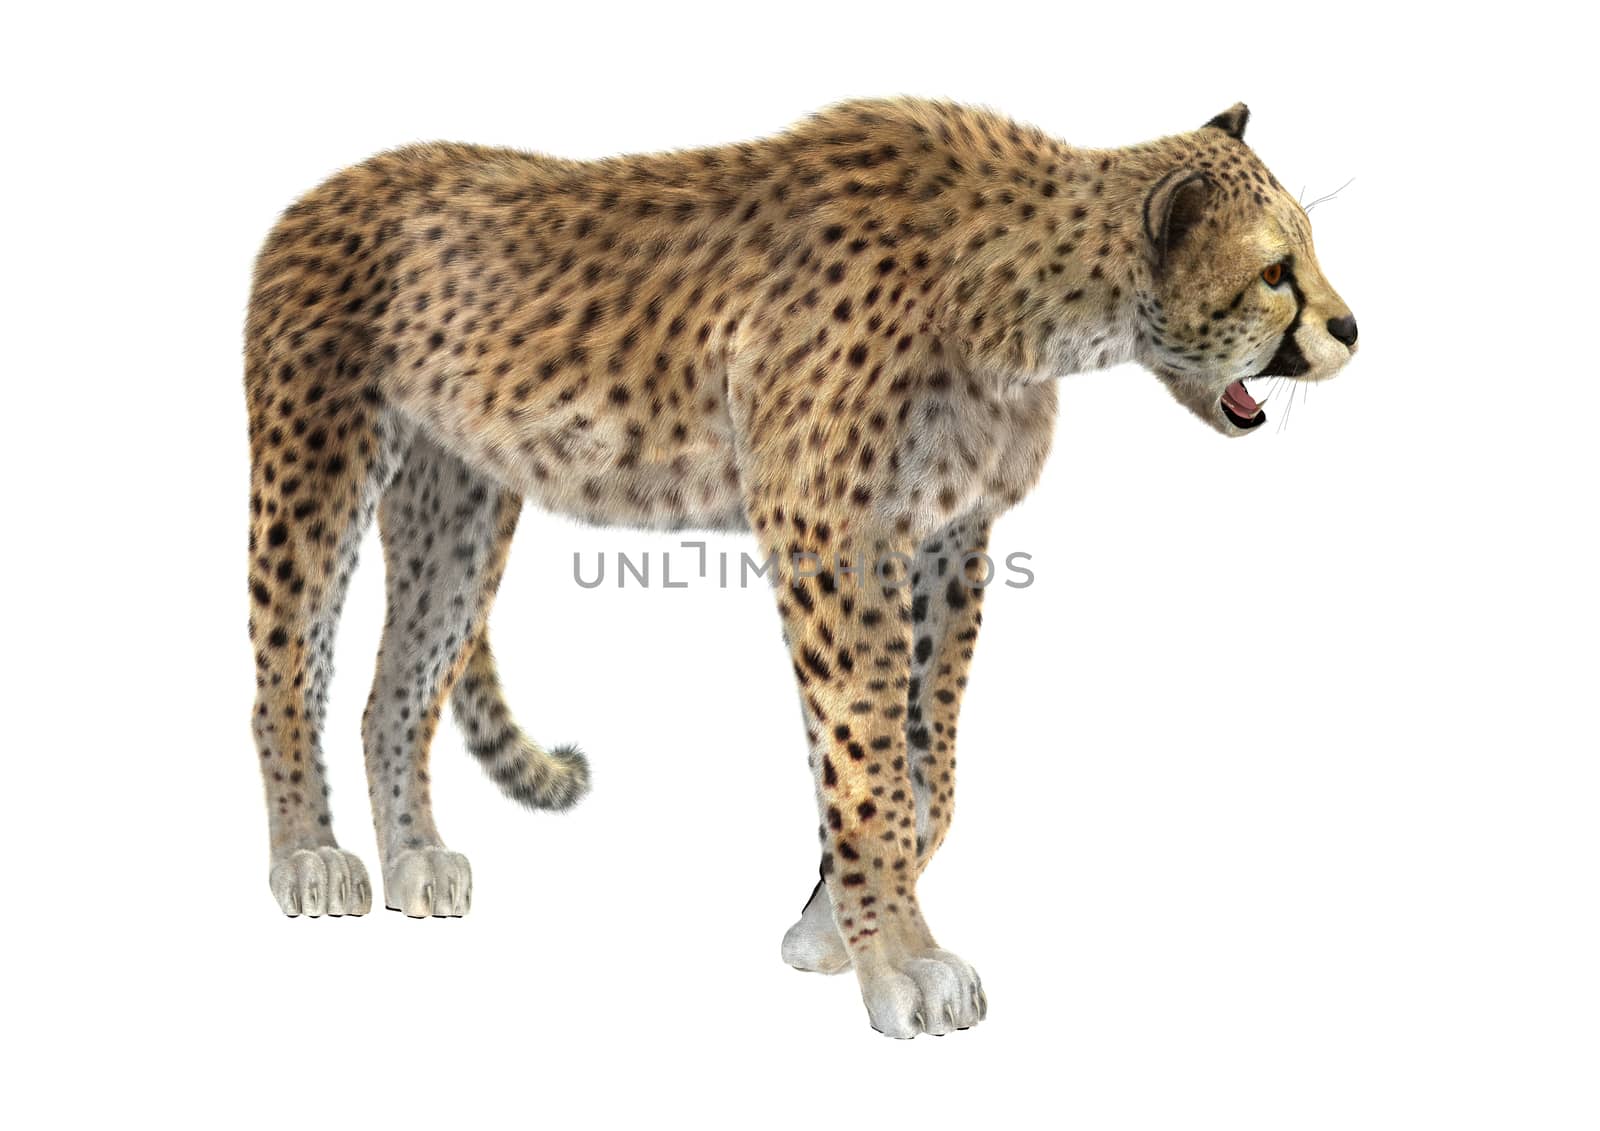 3D digital render of a big cat cheetah isolated on white background